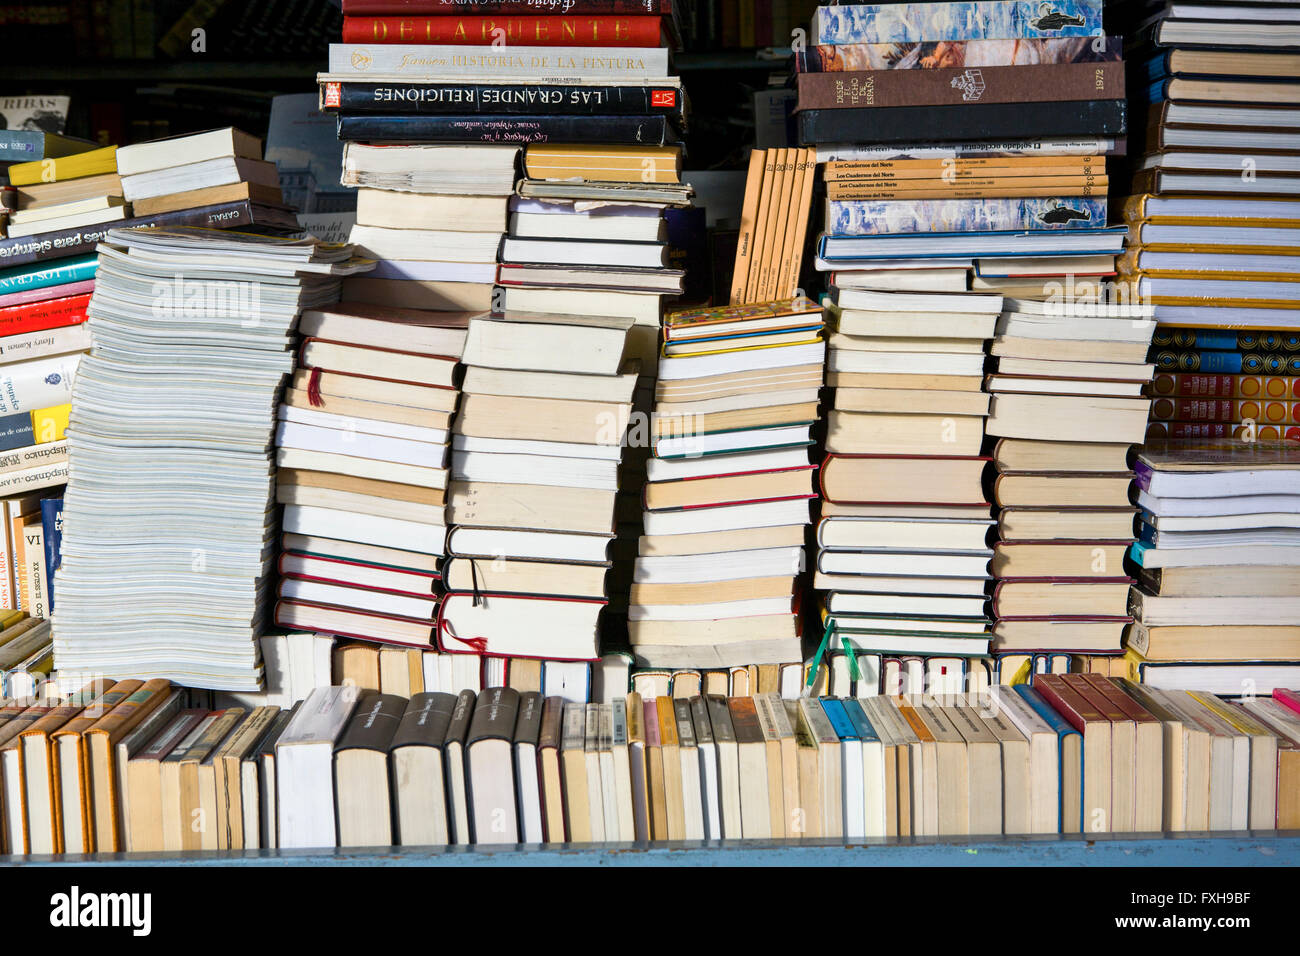 Madrid Spain December 5 Rows Of Secondhand Books For Sale At - 